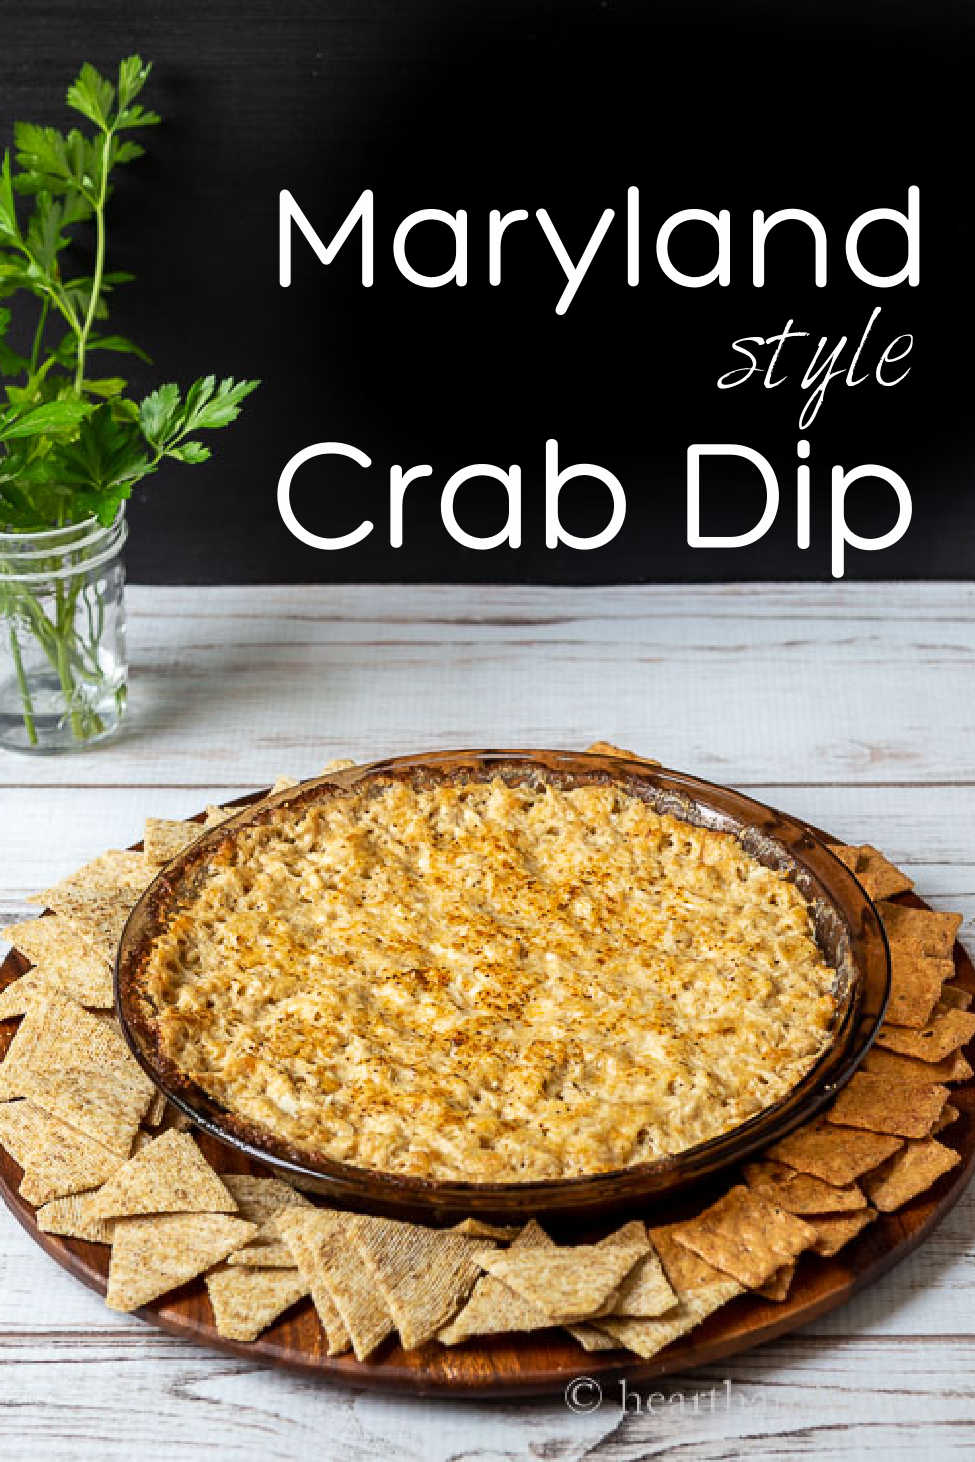 Easy Hot Maryland Crab Dip Recipe with Old Bay | Appetizer